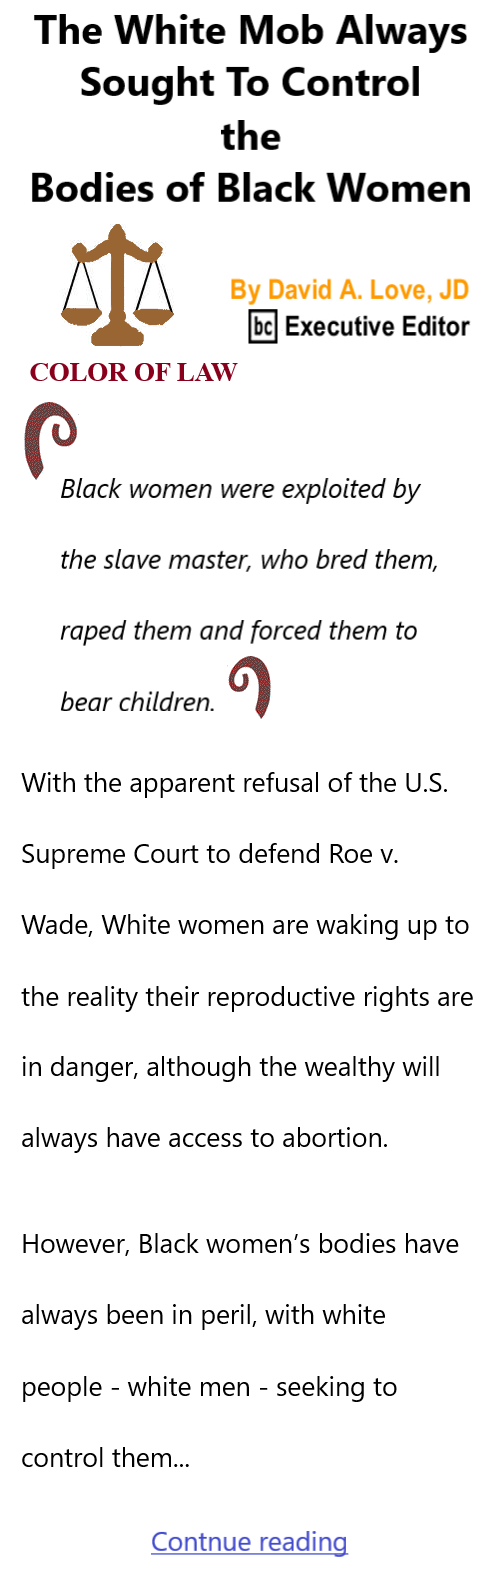 BlackCommentator.com Mar 28, 2024 - Issue 994: Women's History Month -The White Mob Always Sought To Control the Bodies of Black Women- Color of Law By David A. Love, JD, BC Executive Editor